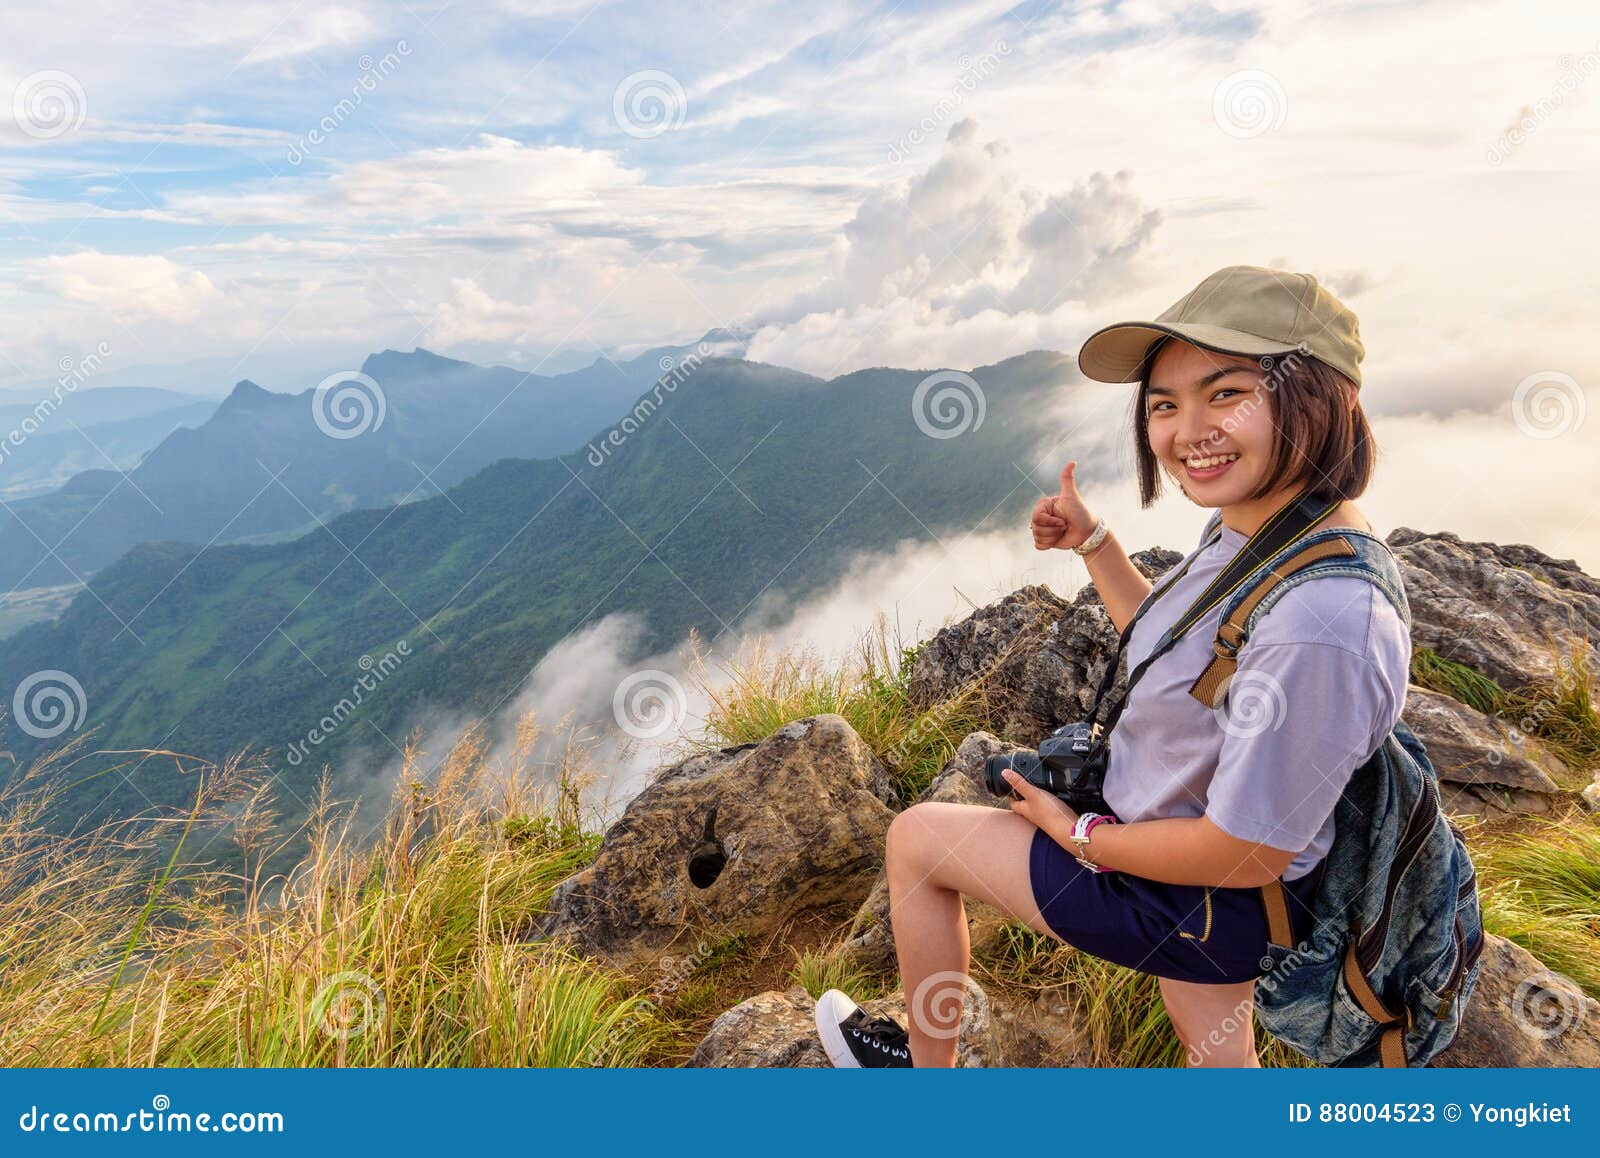 Female Wanderer Poses on Top of the Rock Stock Photo - Image of seaside,  backpacker: 154986976